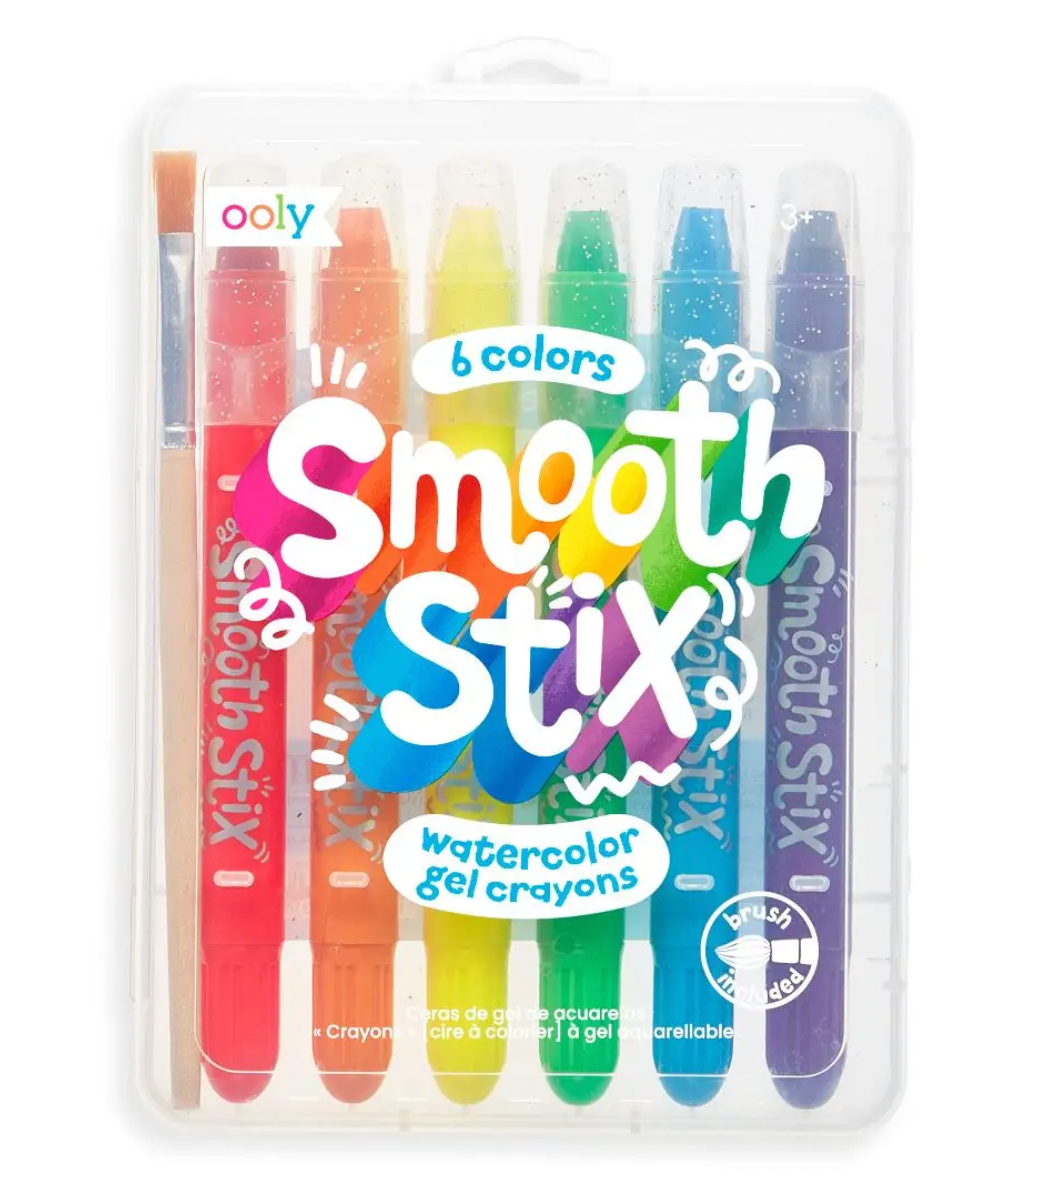 Smooth Stix Watercolor Gel Crayons by Ooly